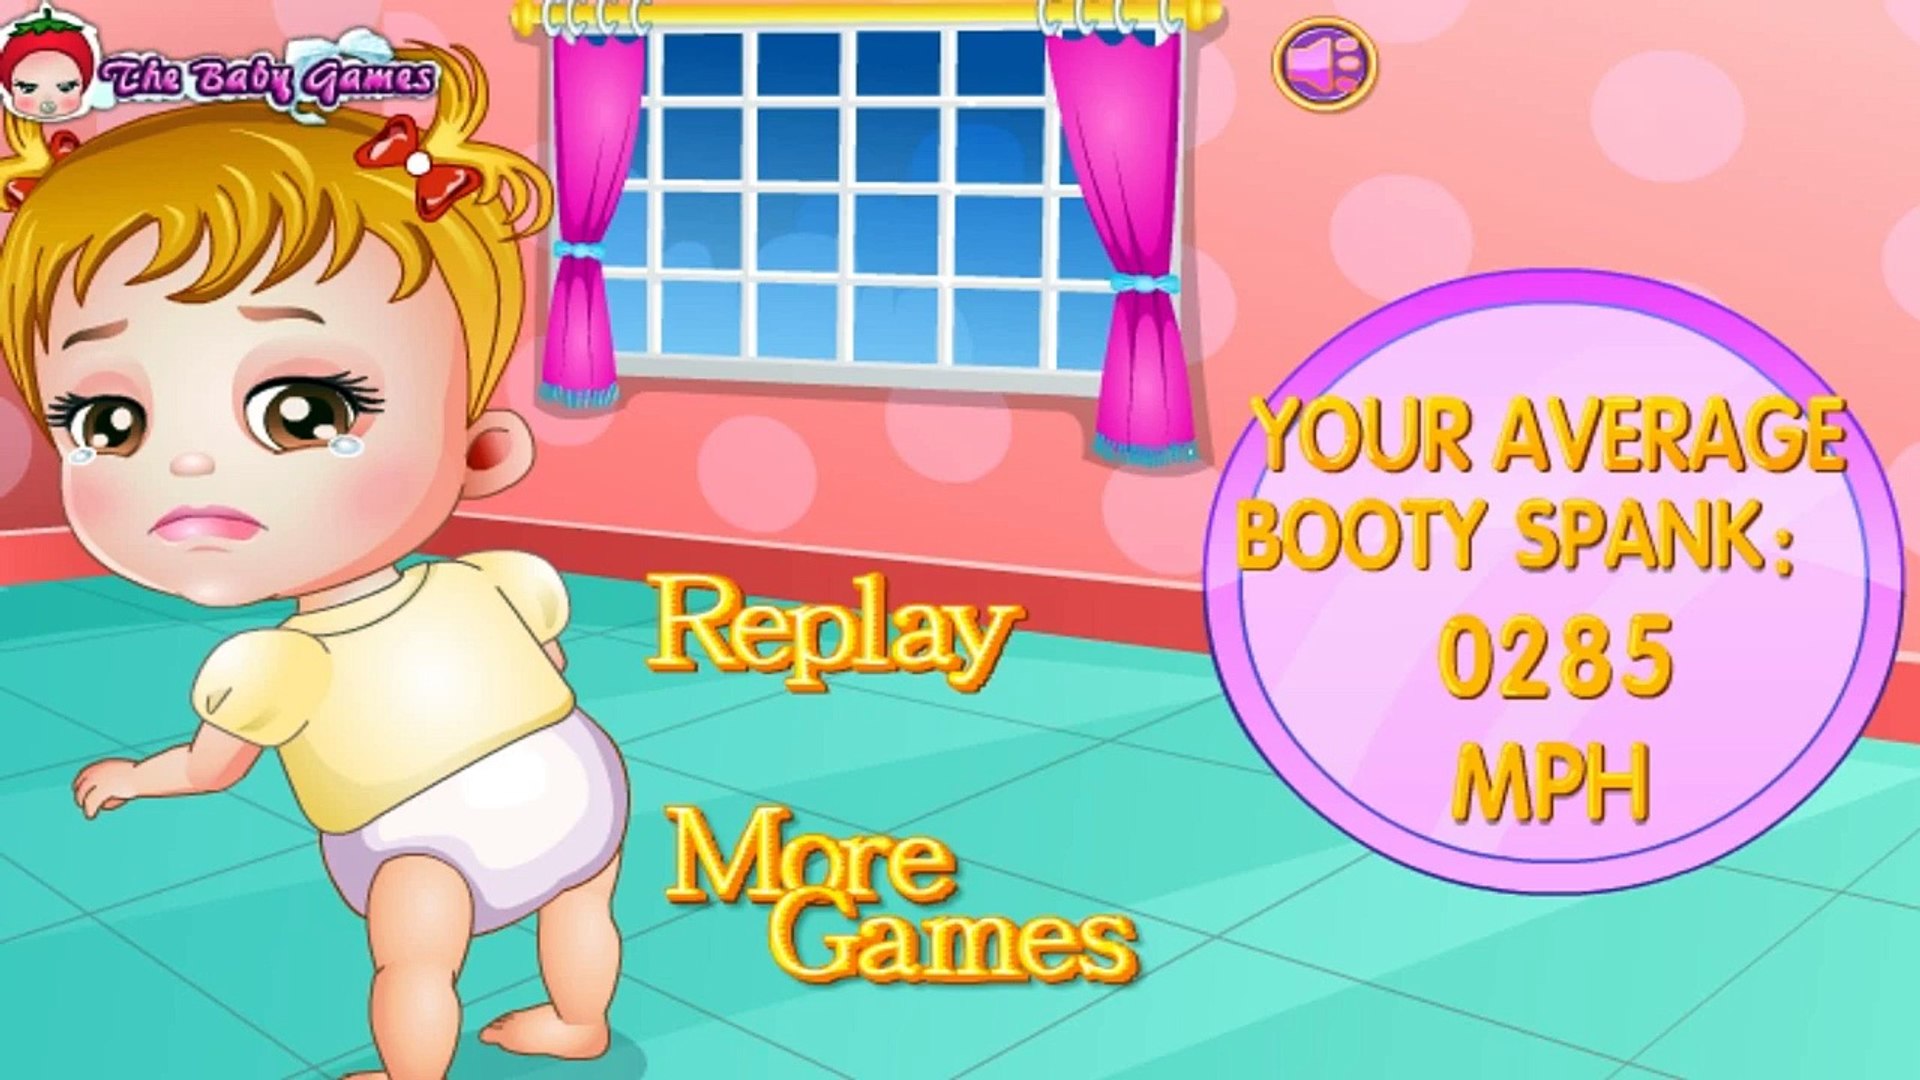 Spank Cute Baby Booty | Game for Little kids | Baby Games - Dailymotion  Video